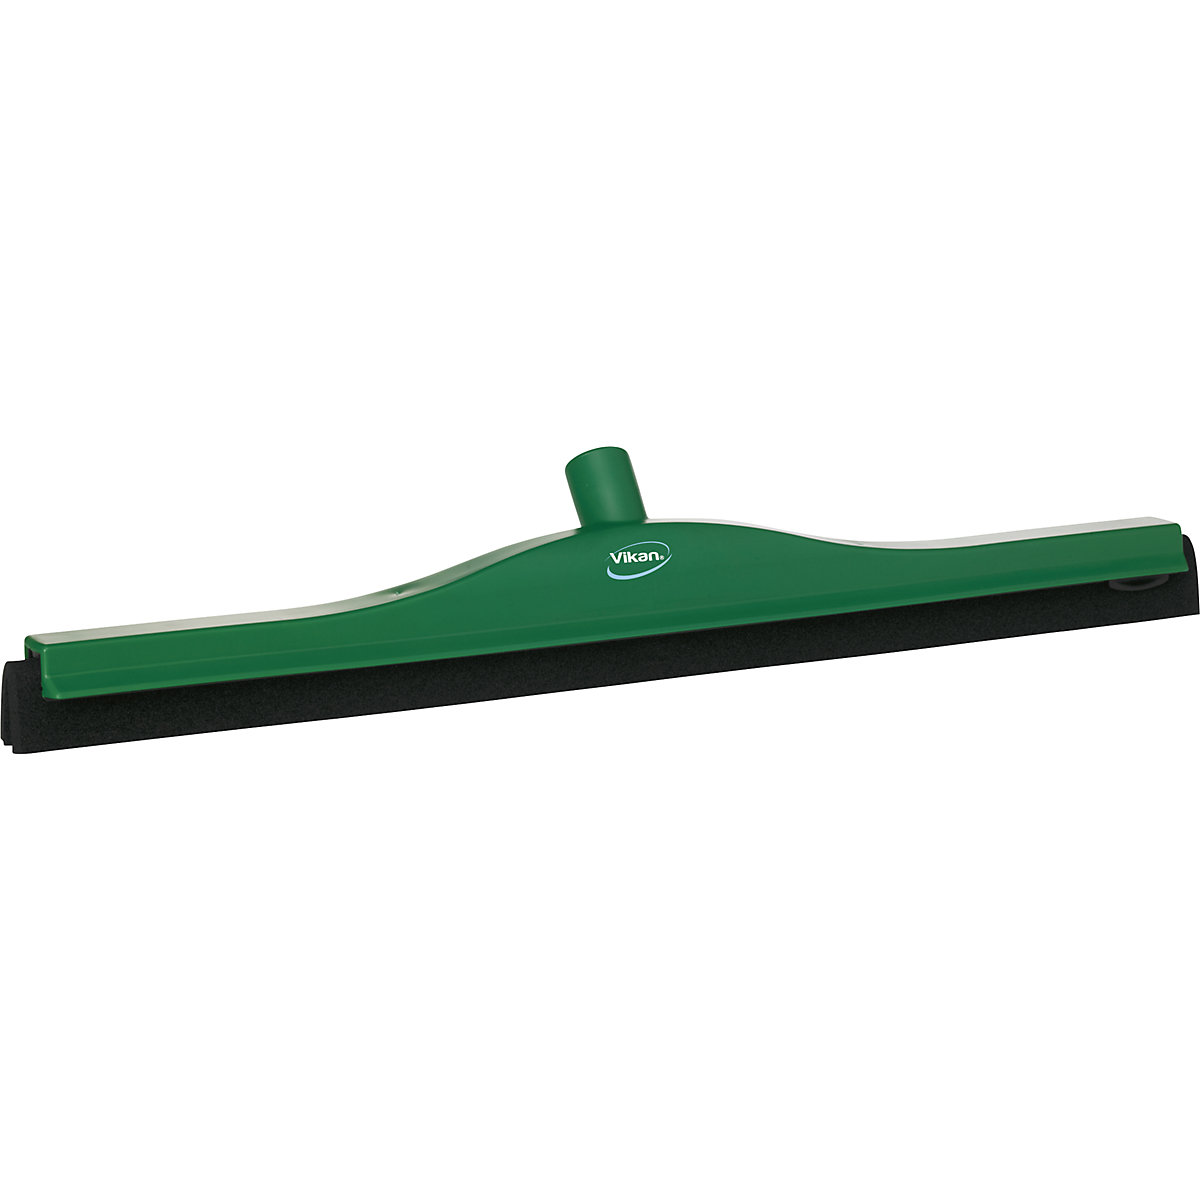 Water wiper with replaceable cartridge – Vikan